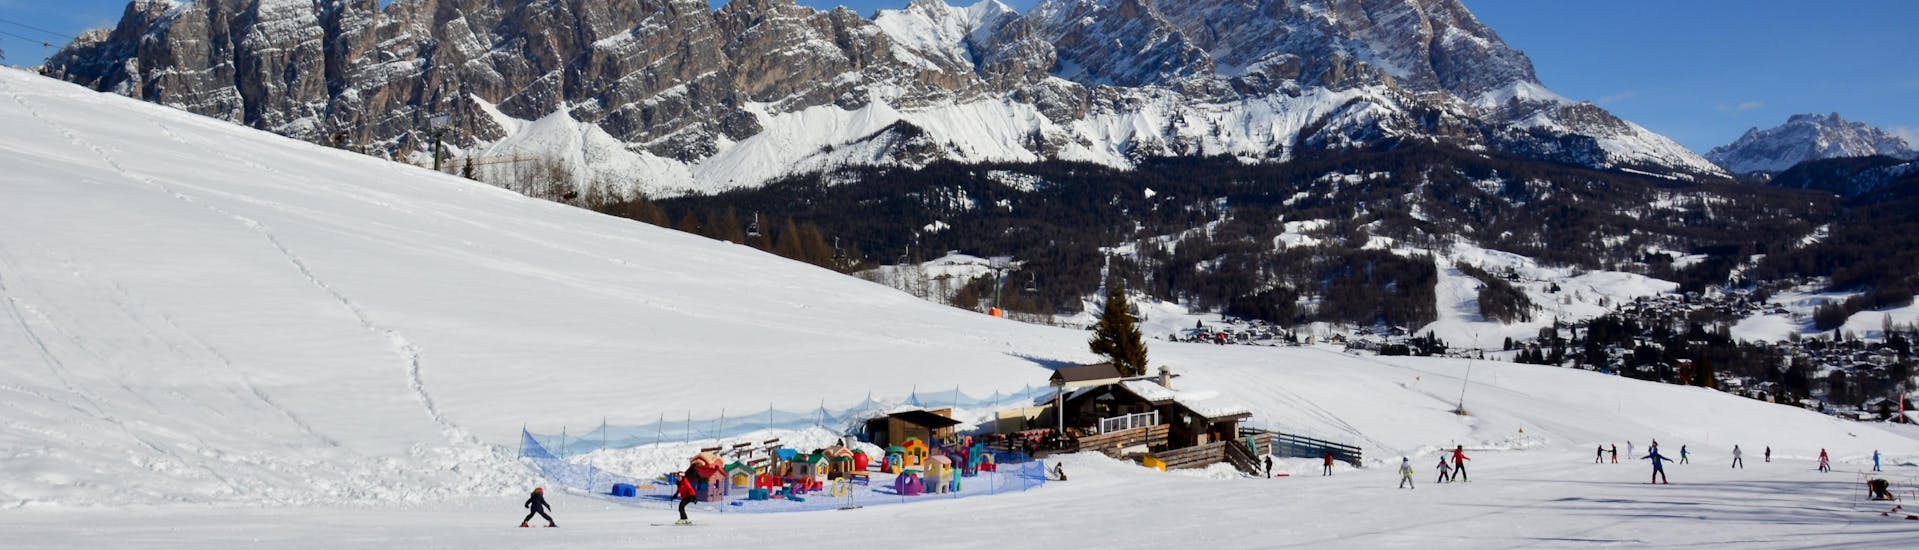 A view of a snowy mountain top in the ski resort of Val di Zoldo, where ski schools gather to start their ski lessons.